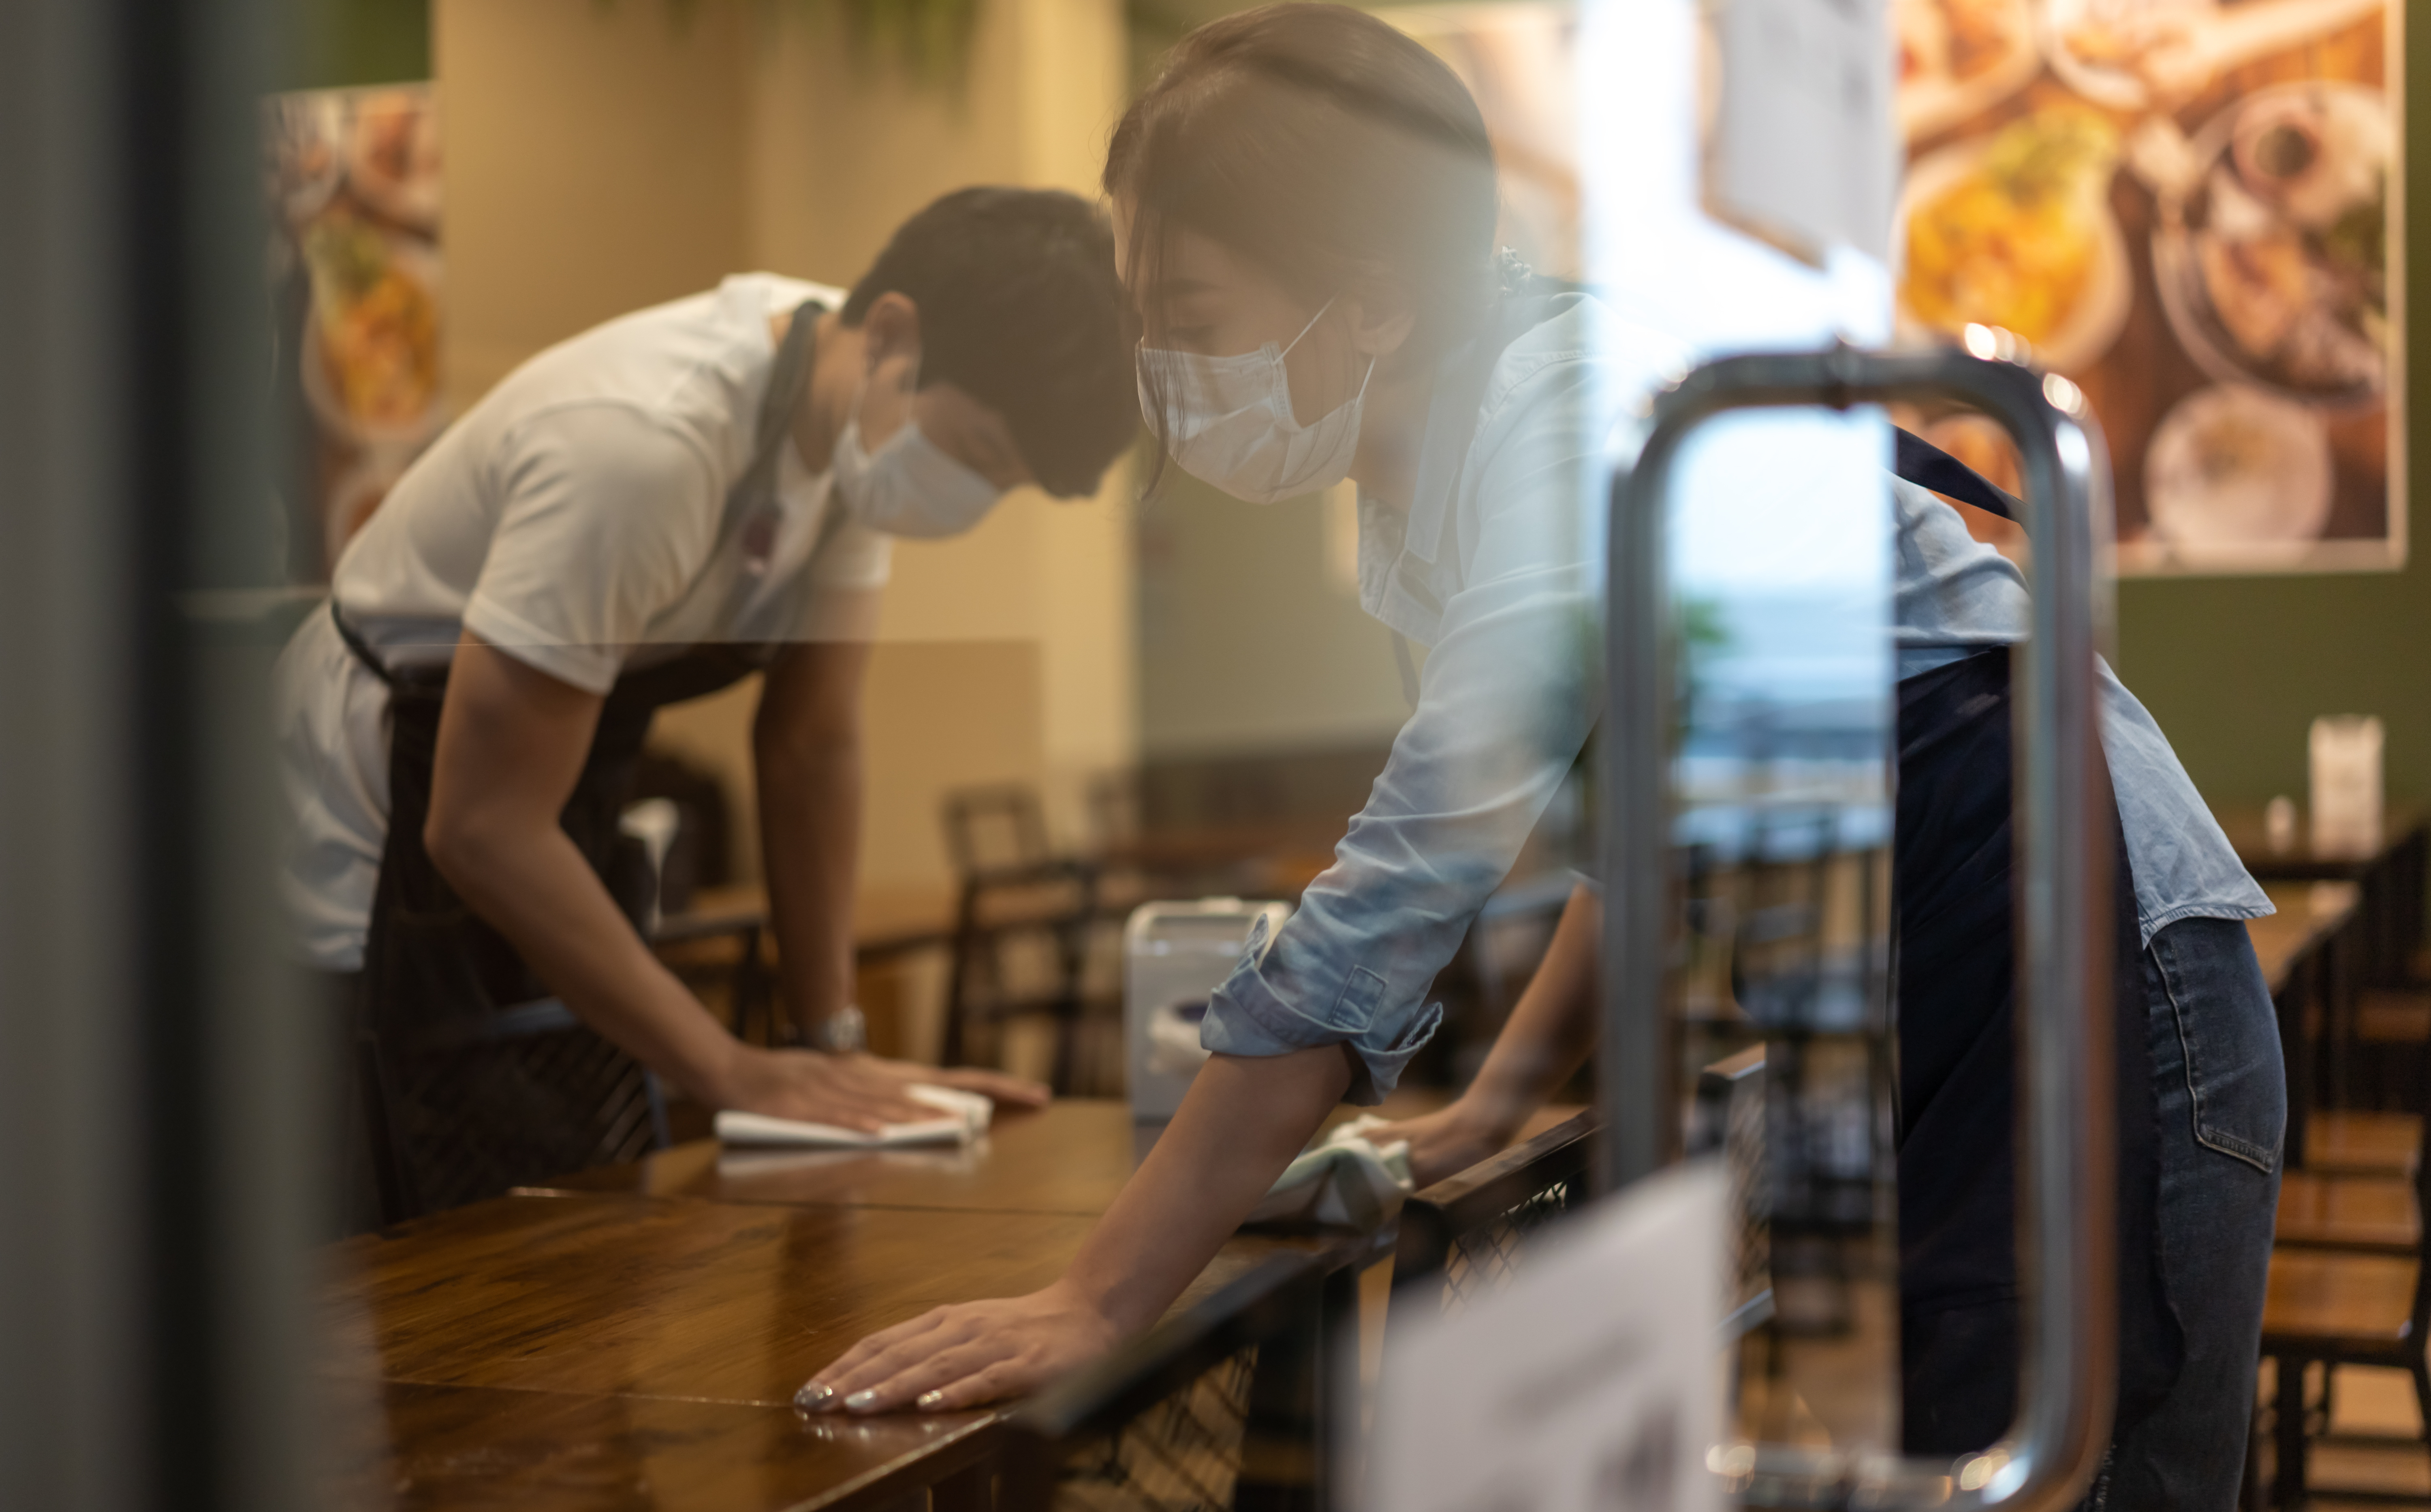 Two waiters wearing protective face mask cleans tables in a restaurant behind a window